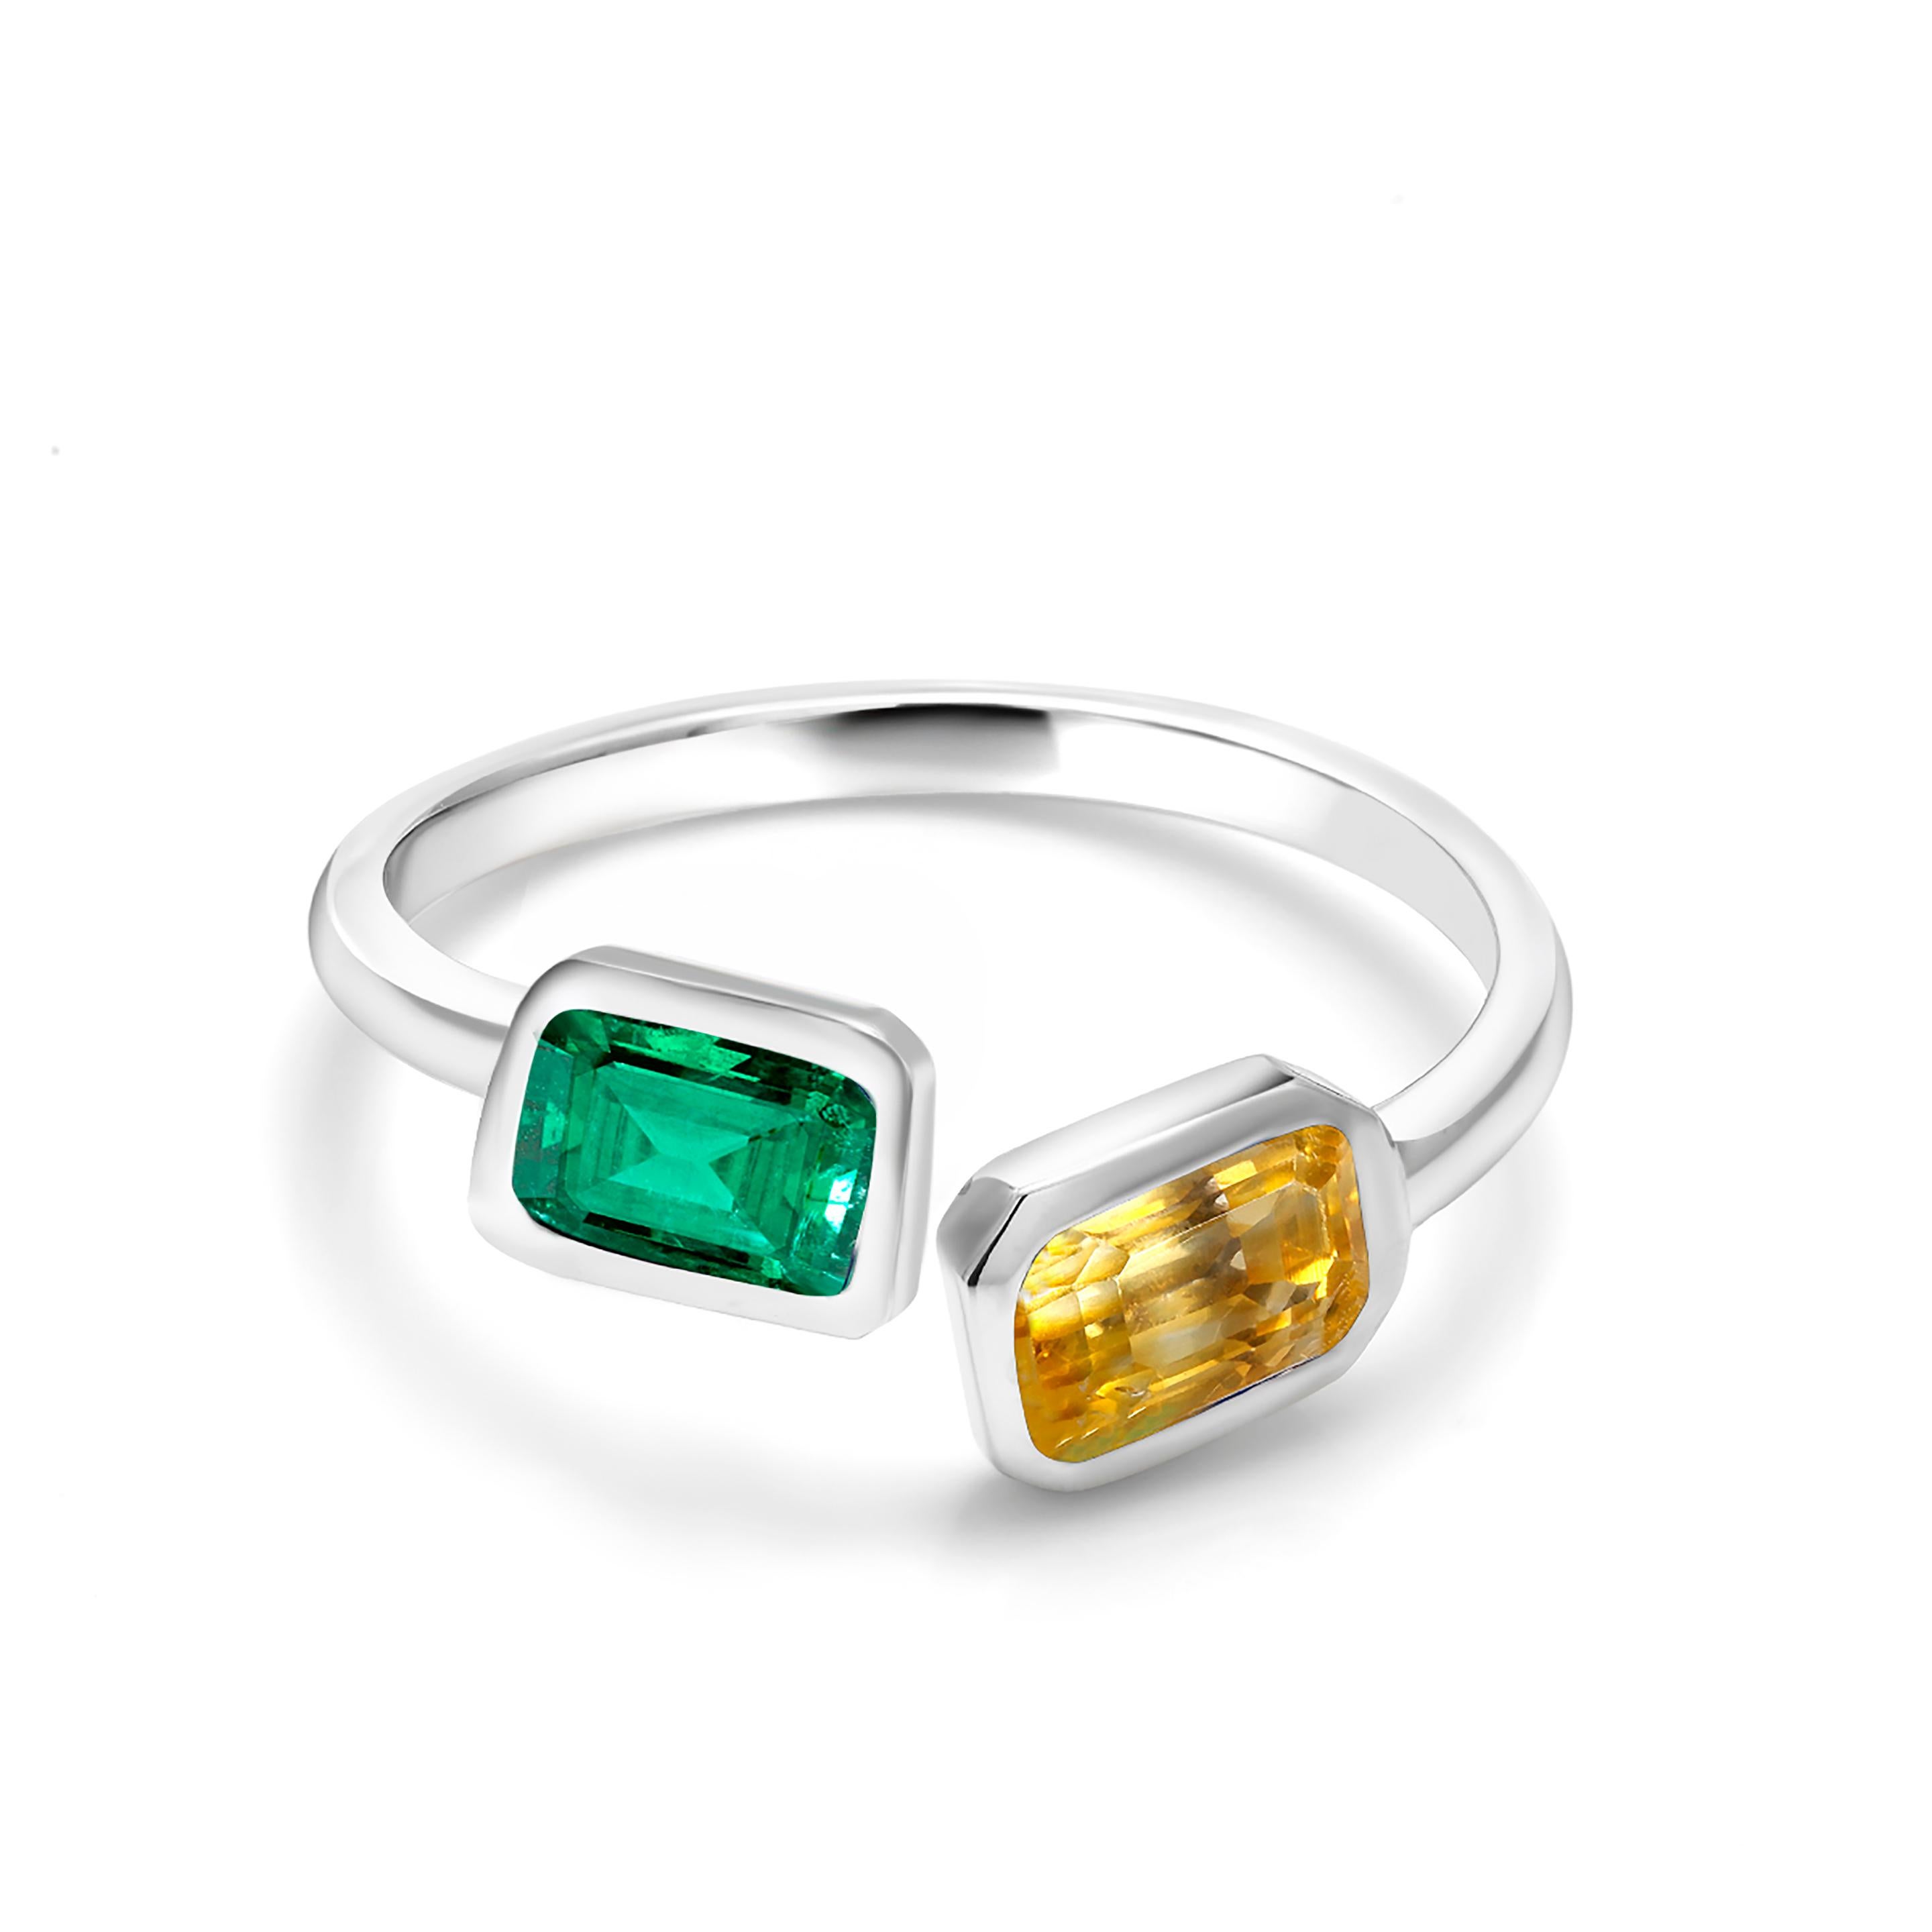 Fourteen karats white gold open shank bezel set cocktail ring
Emerald cut shape emerald measuring 7x5 millimeter and weighing 0.65 carat
Emerald cut yellow sapphire measuring 7x5 millimeter and weighing 0.95 carat
Ring size 6
New Ring
The ring can